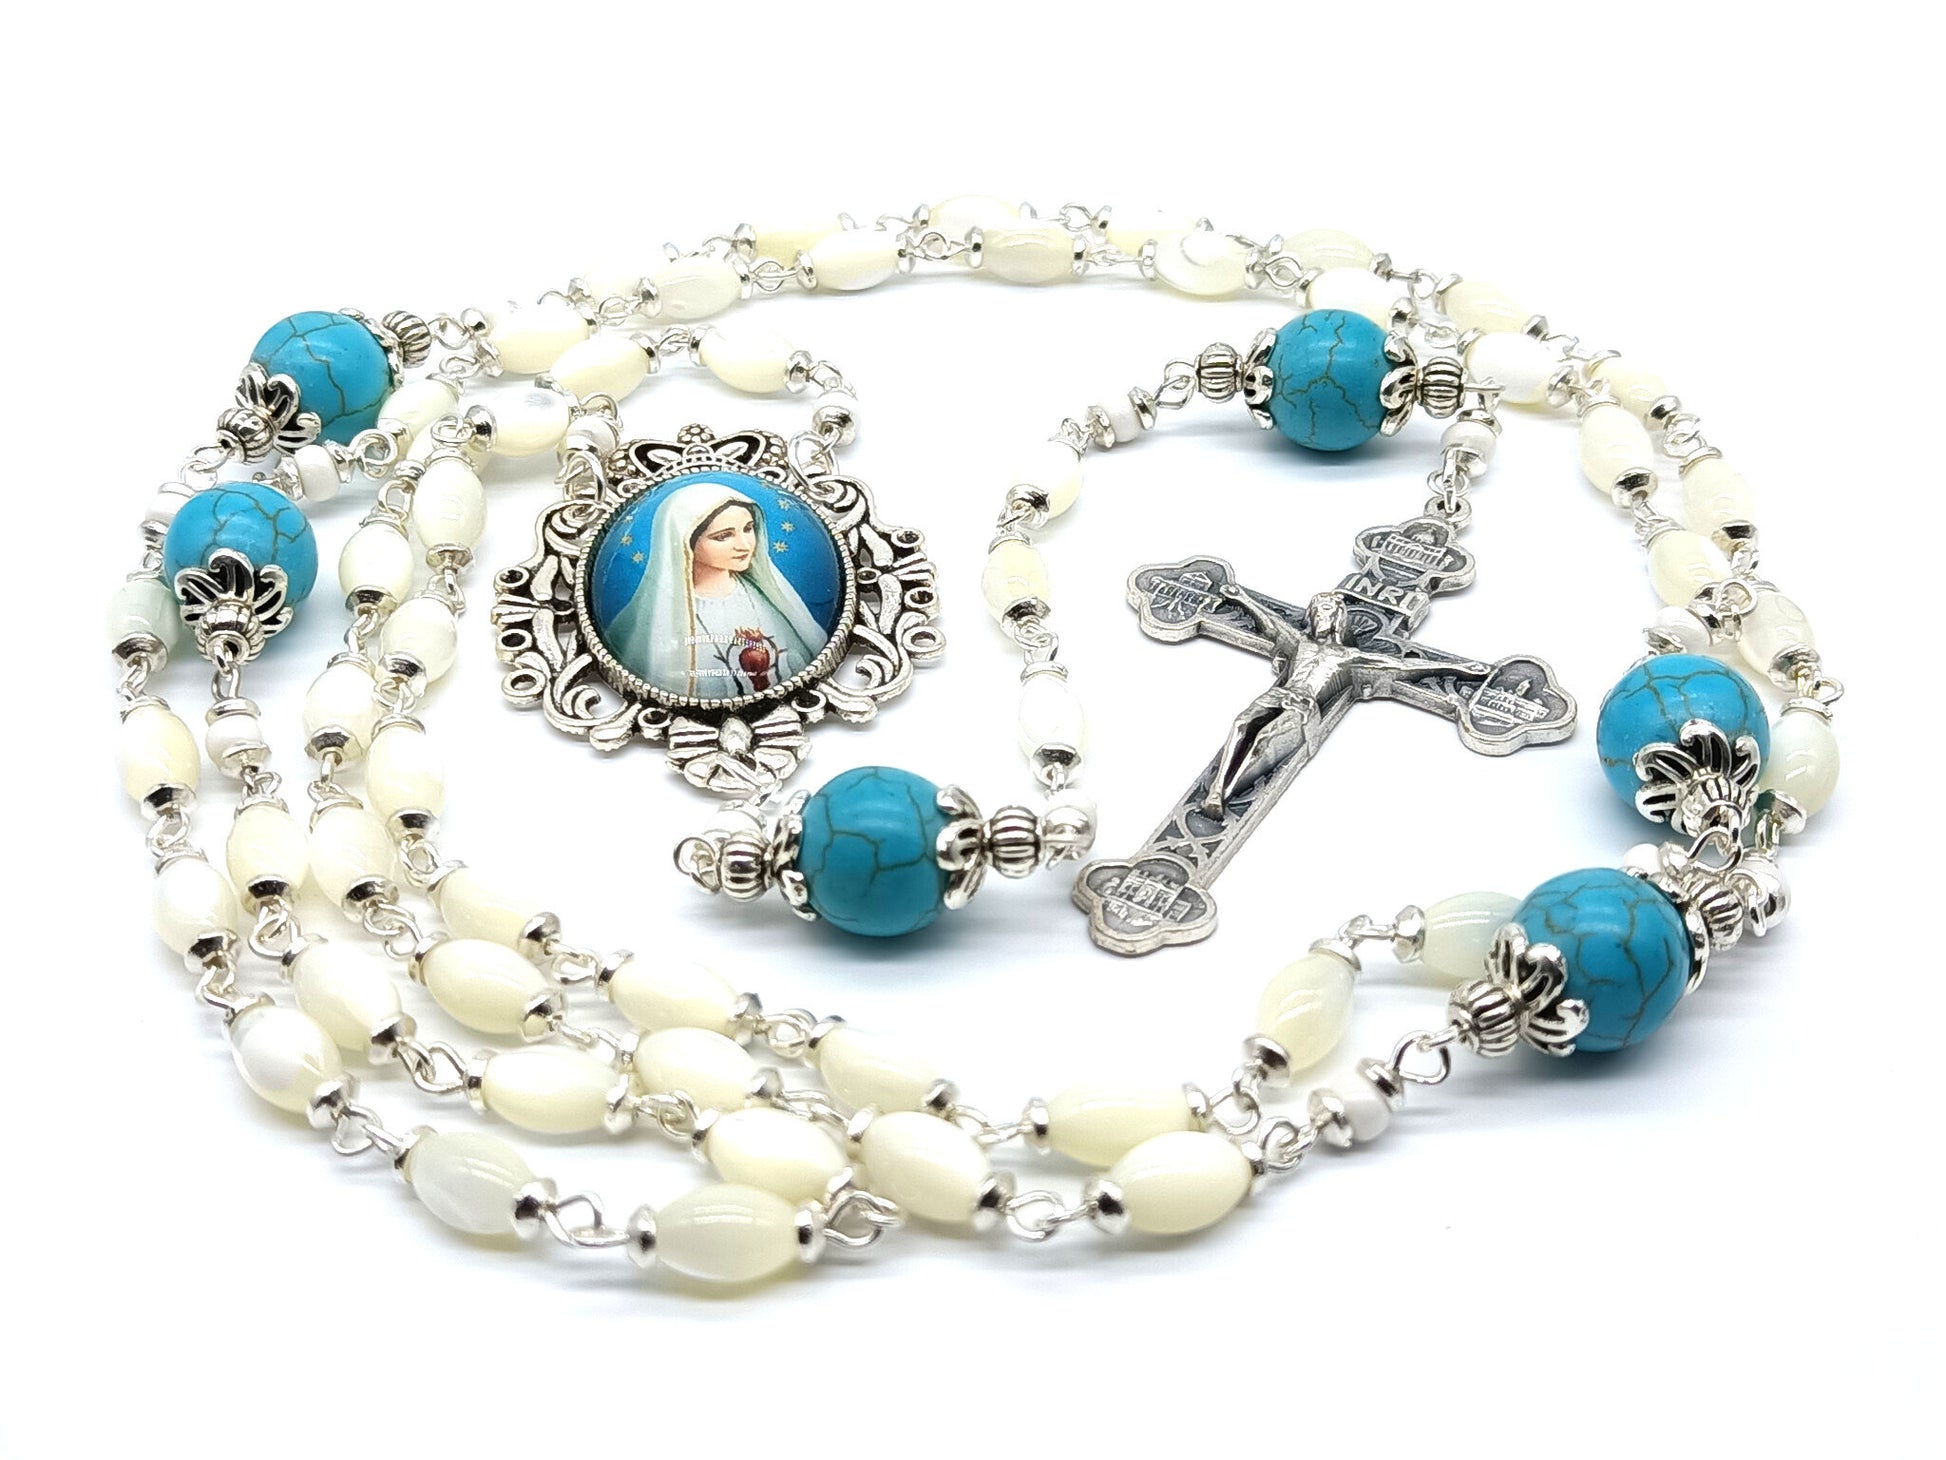 Genuine pearl unique rosary beads with Four Basilicas crucifix and silver Our Lady picture medal and blue gemstone pater beads.